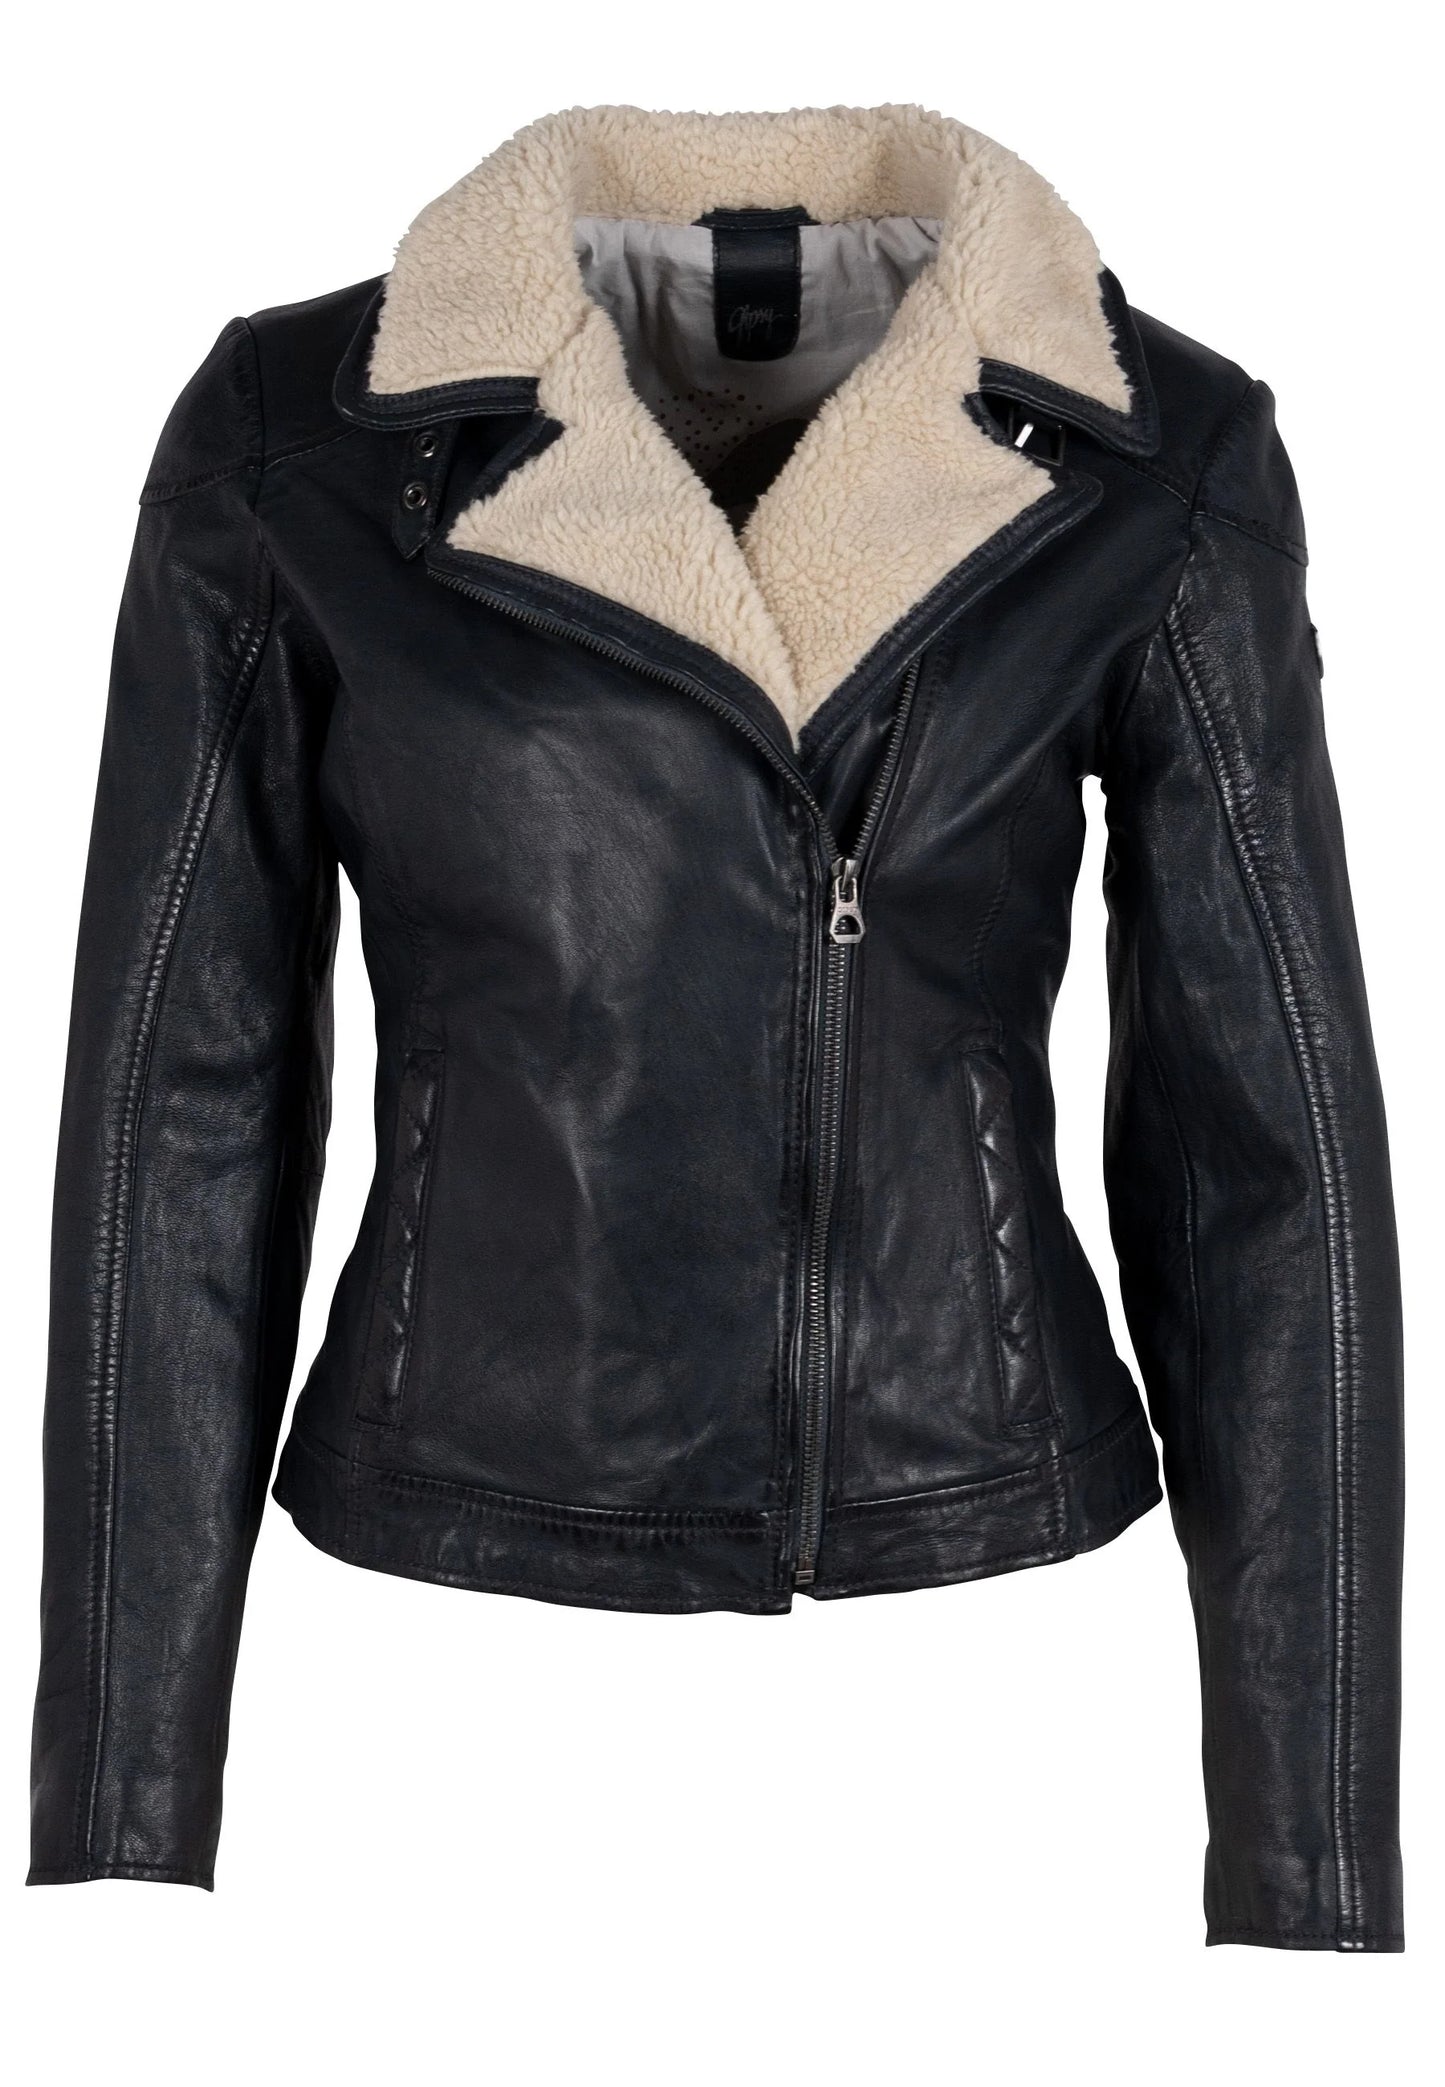 Mauritius Mauritius - Jenja CF Woman's Leather Jacket - Navy available at The Good Life Boutique